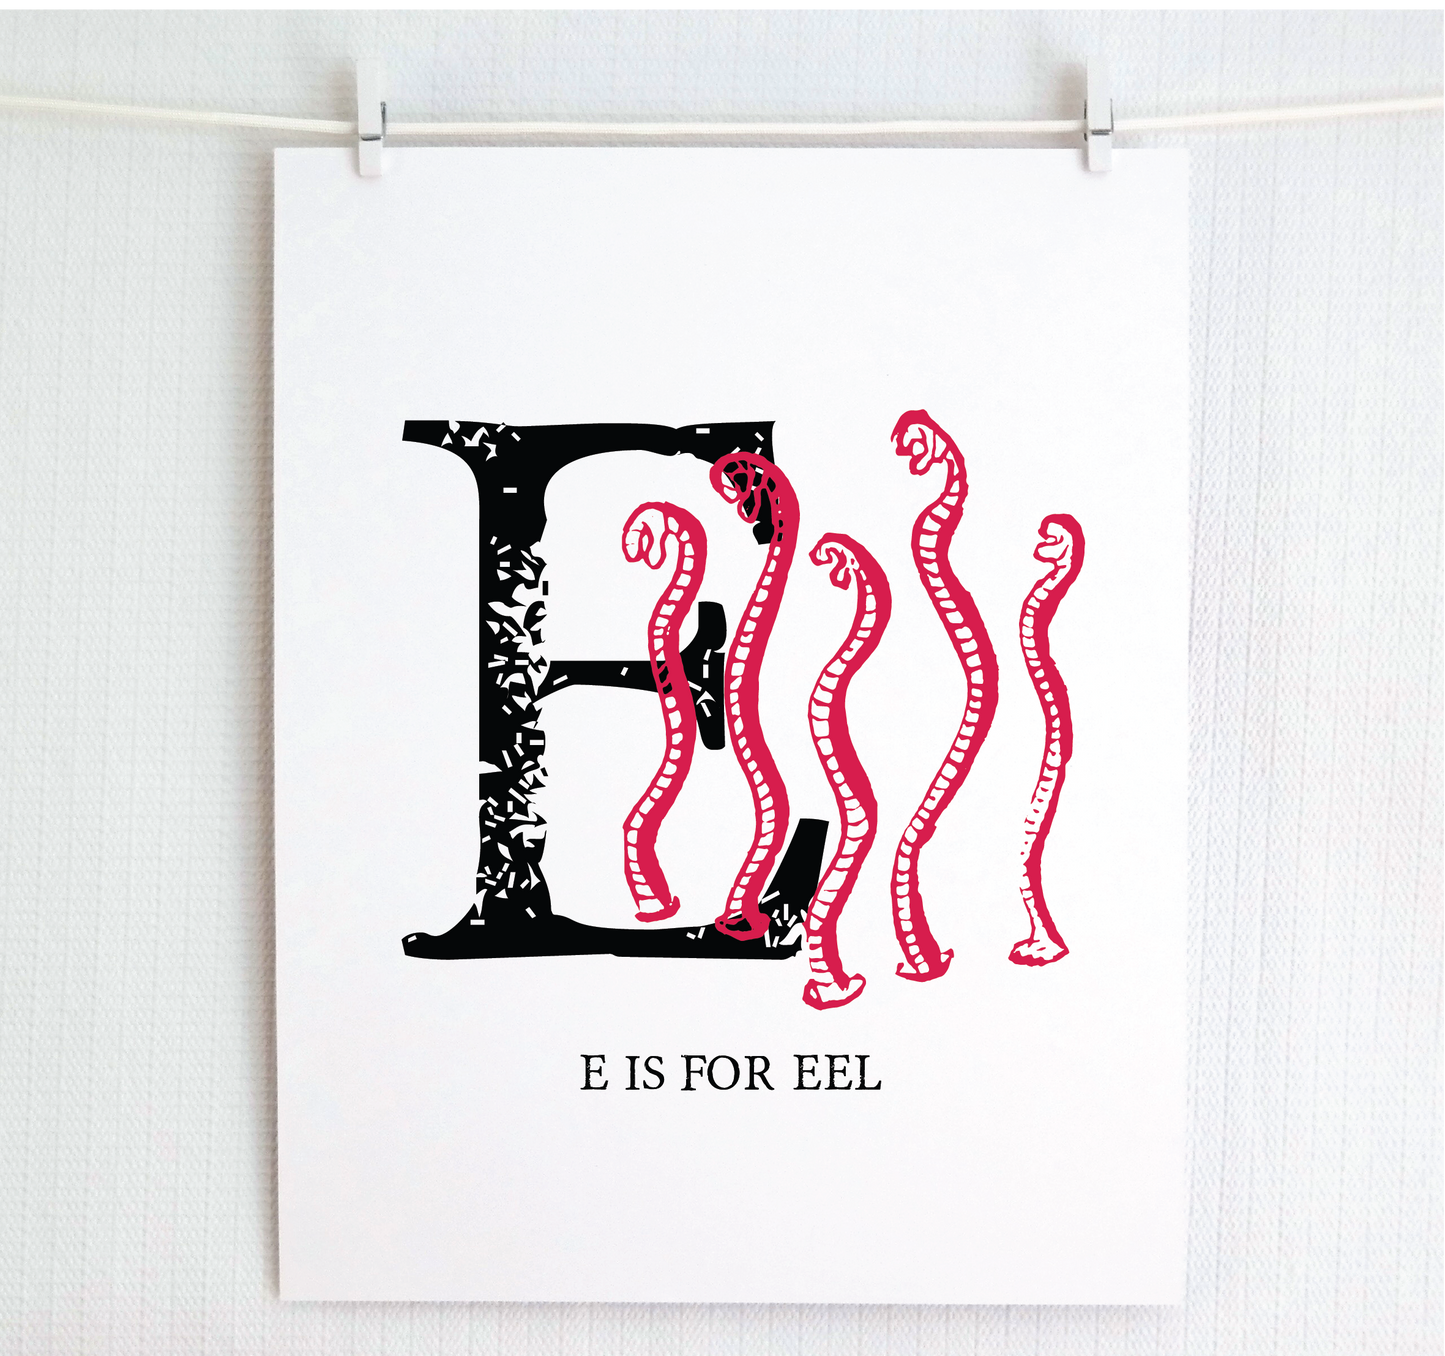 E is for Eels